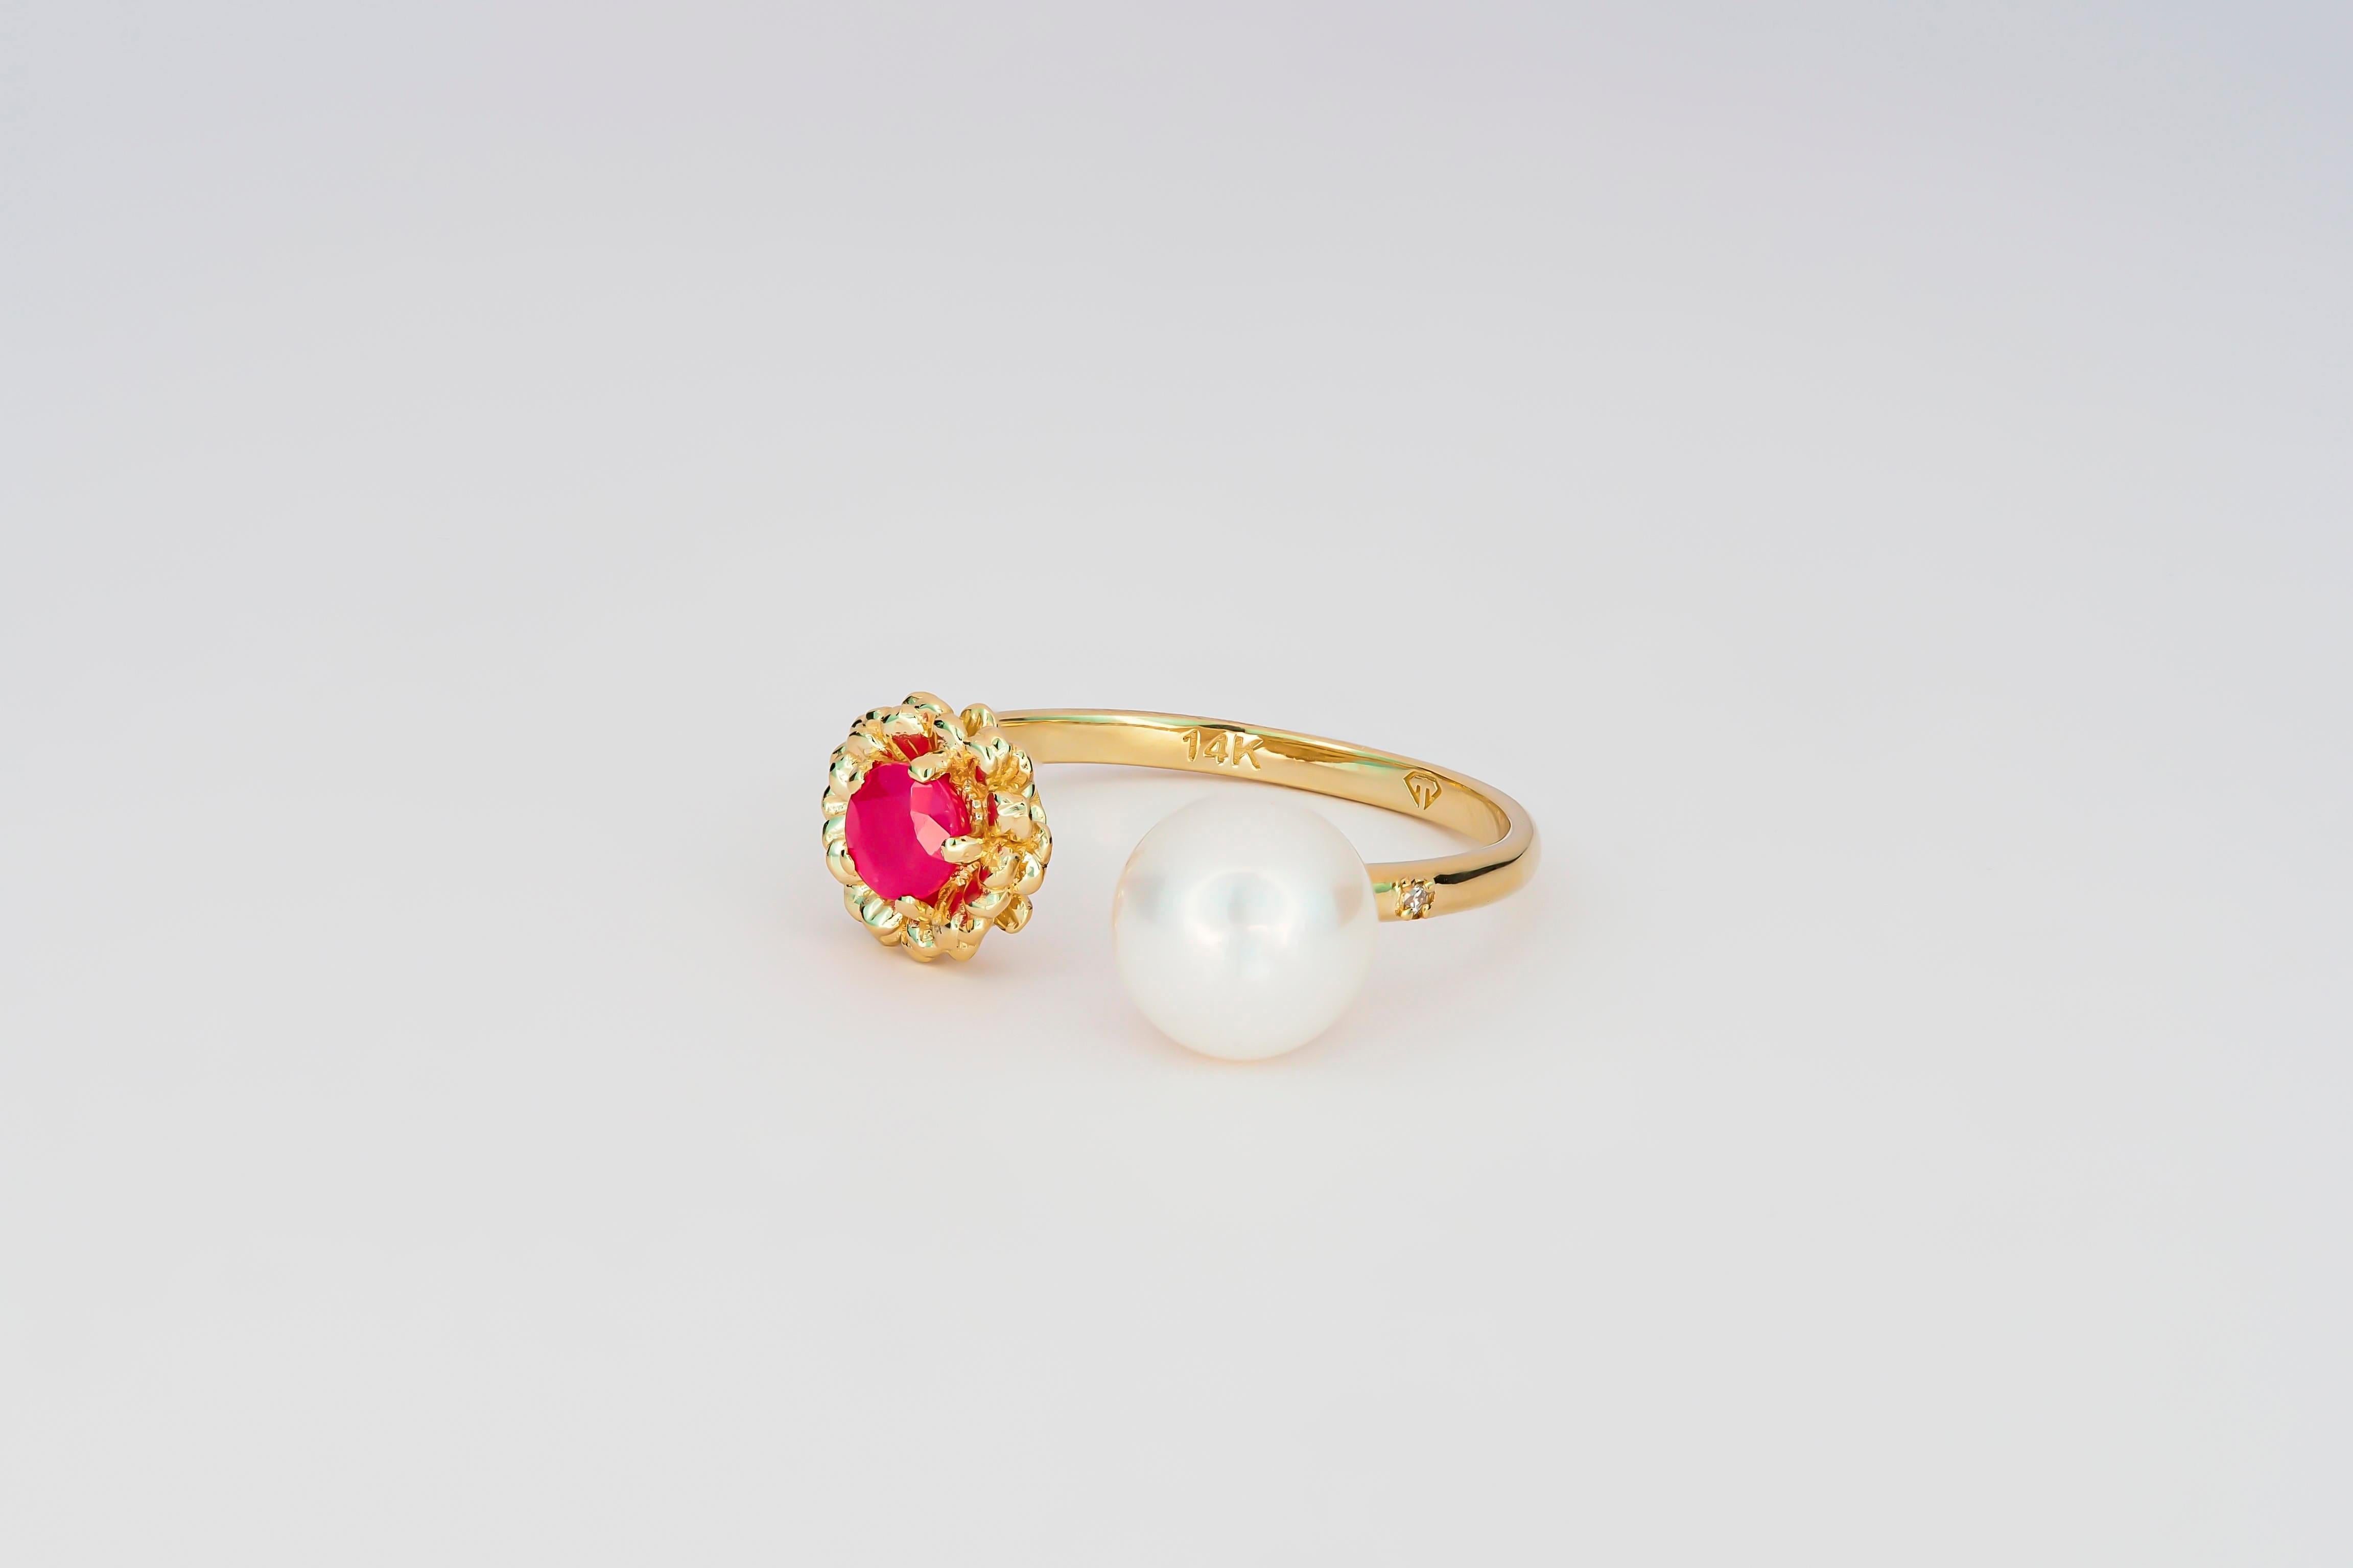 Women's Daisy ring with ruby.  For Sale